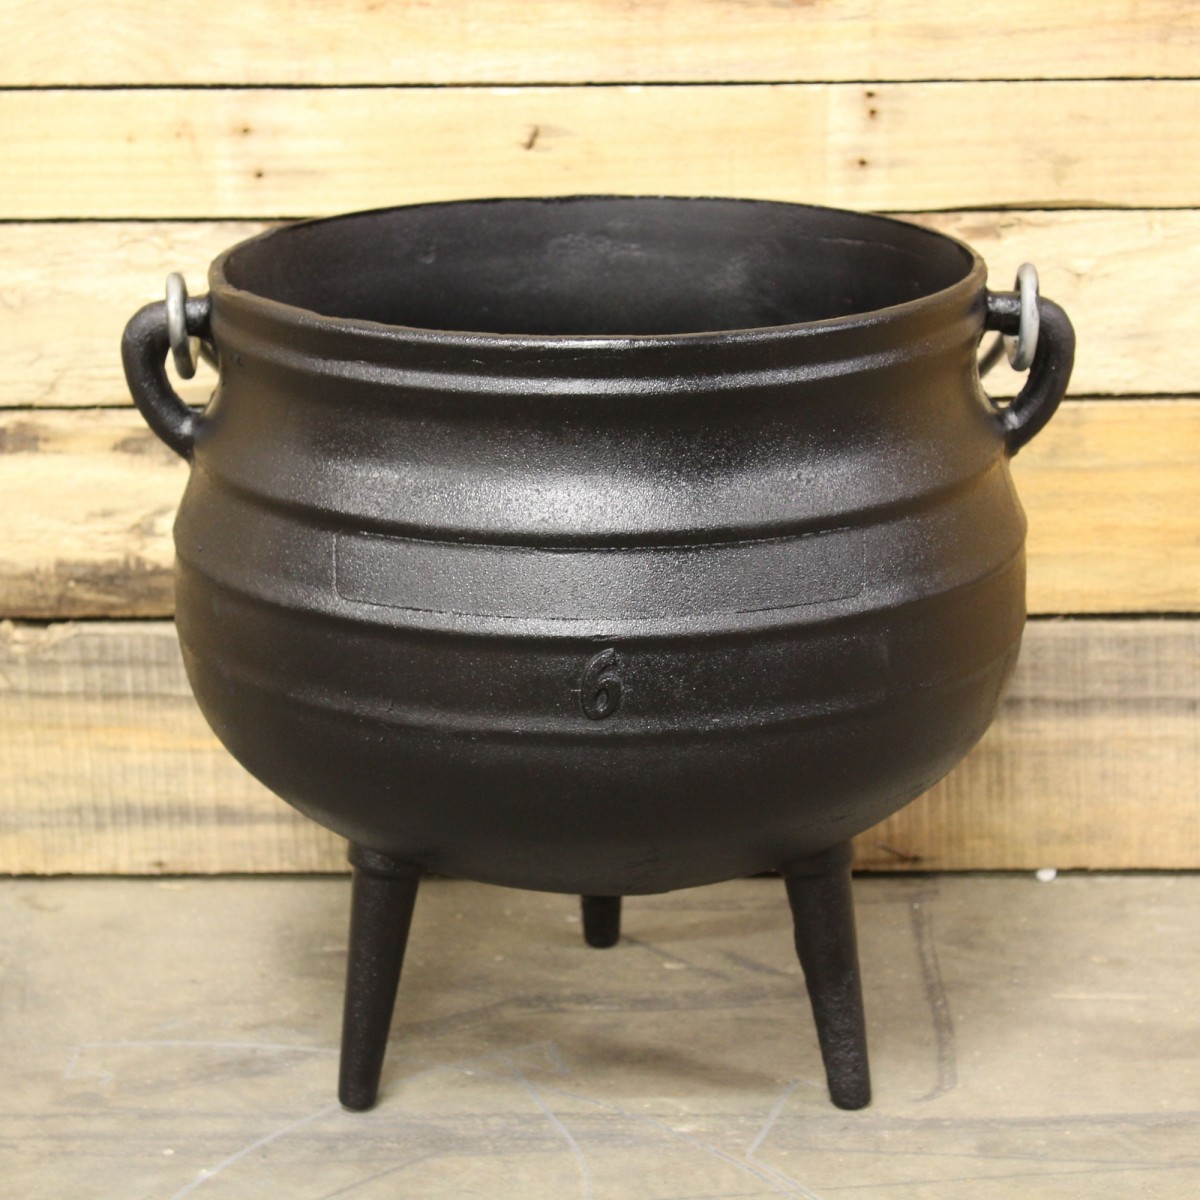 A brief history of the cast-iron potjie pot